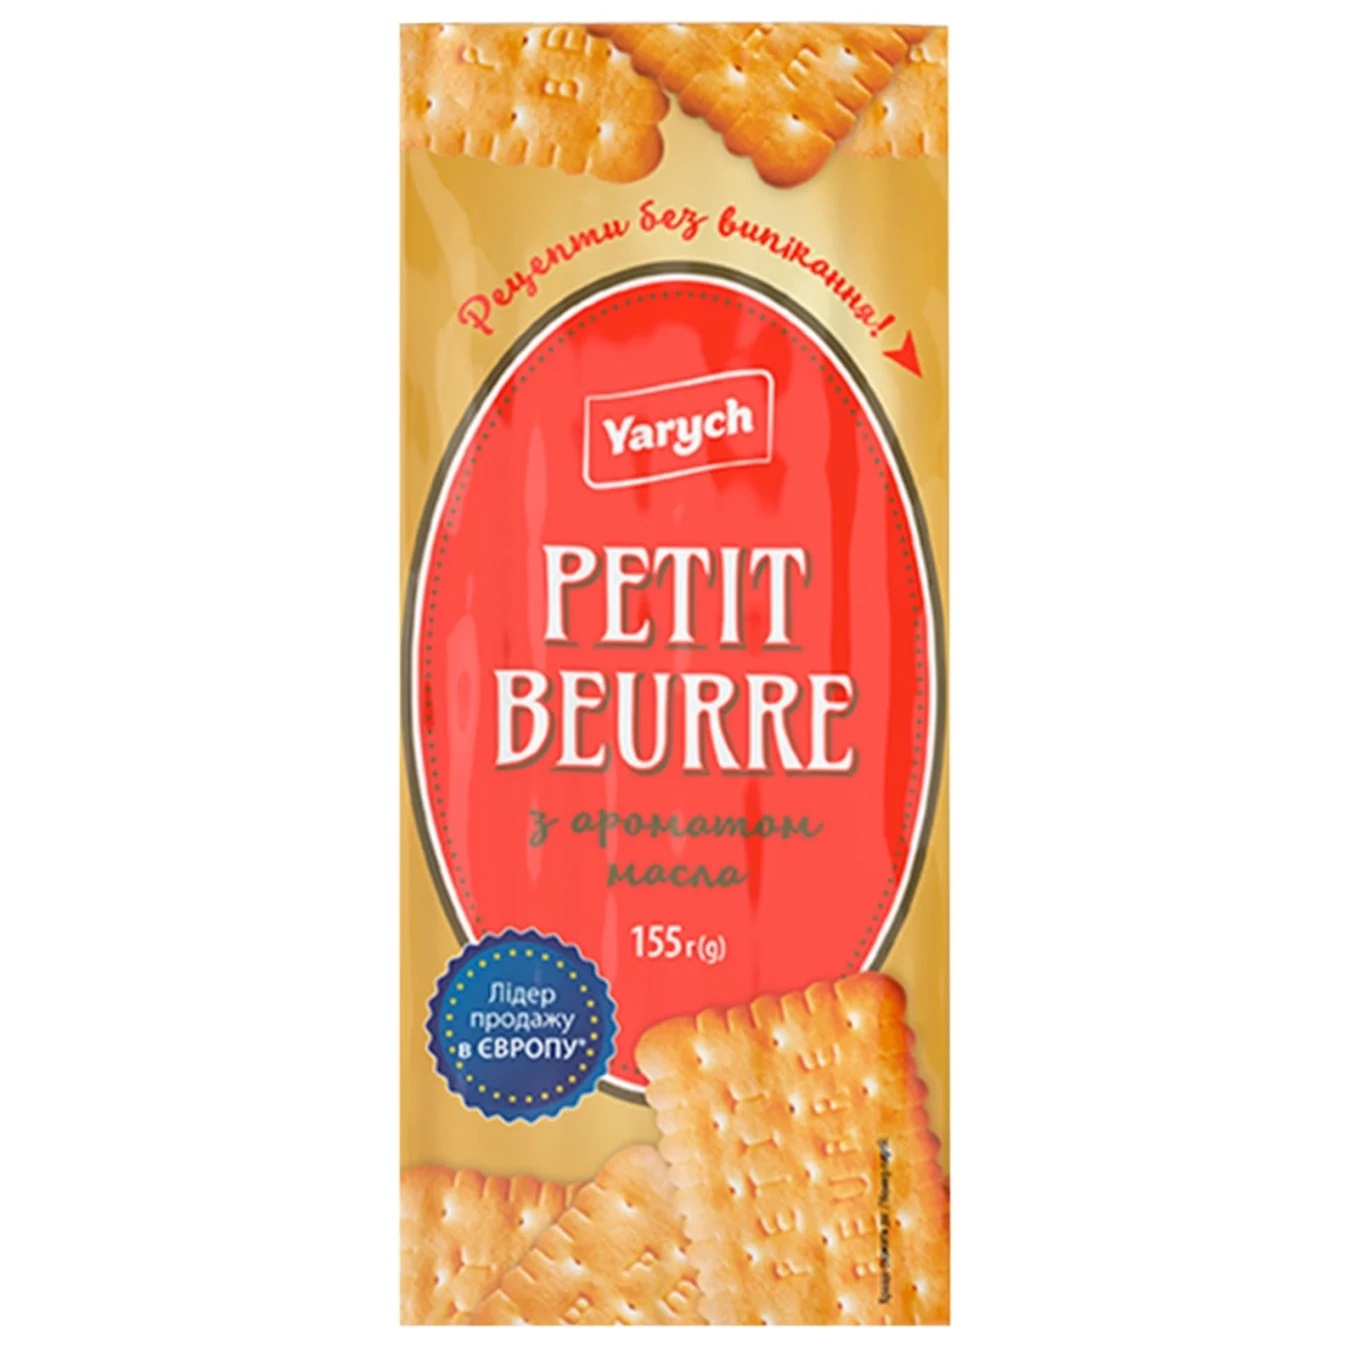 Yarych long petit beurre cookies with butter aroma 155g 2